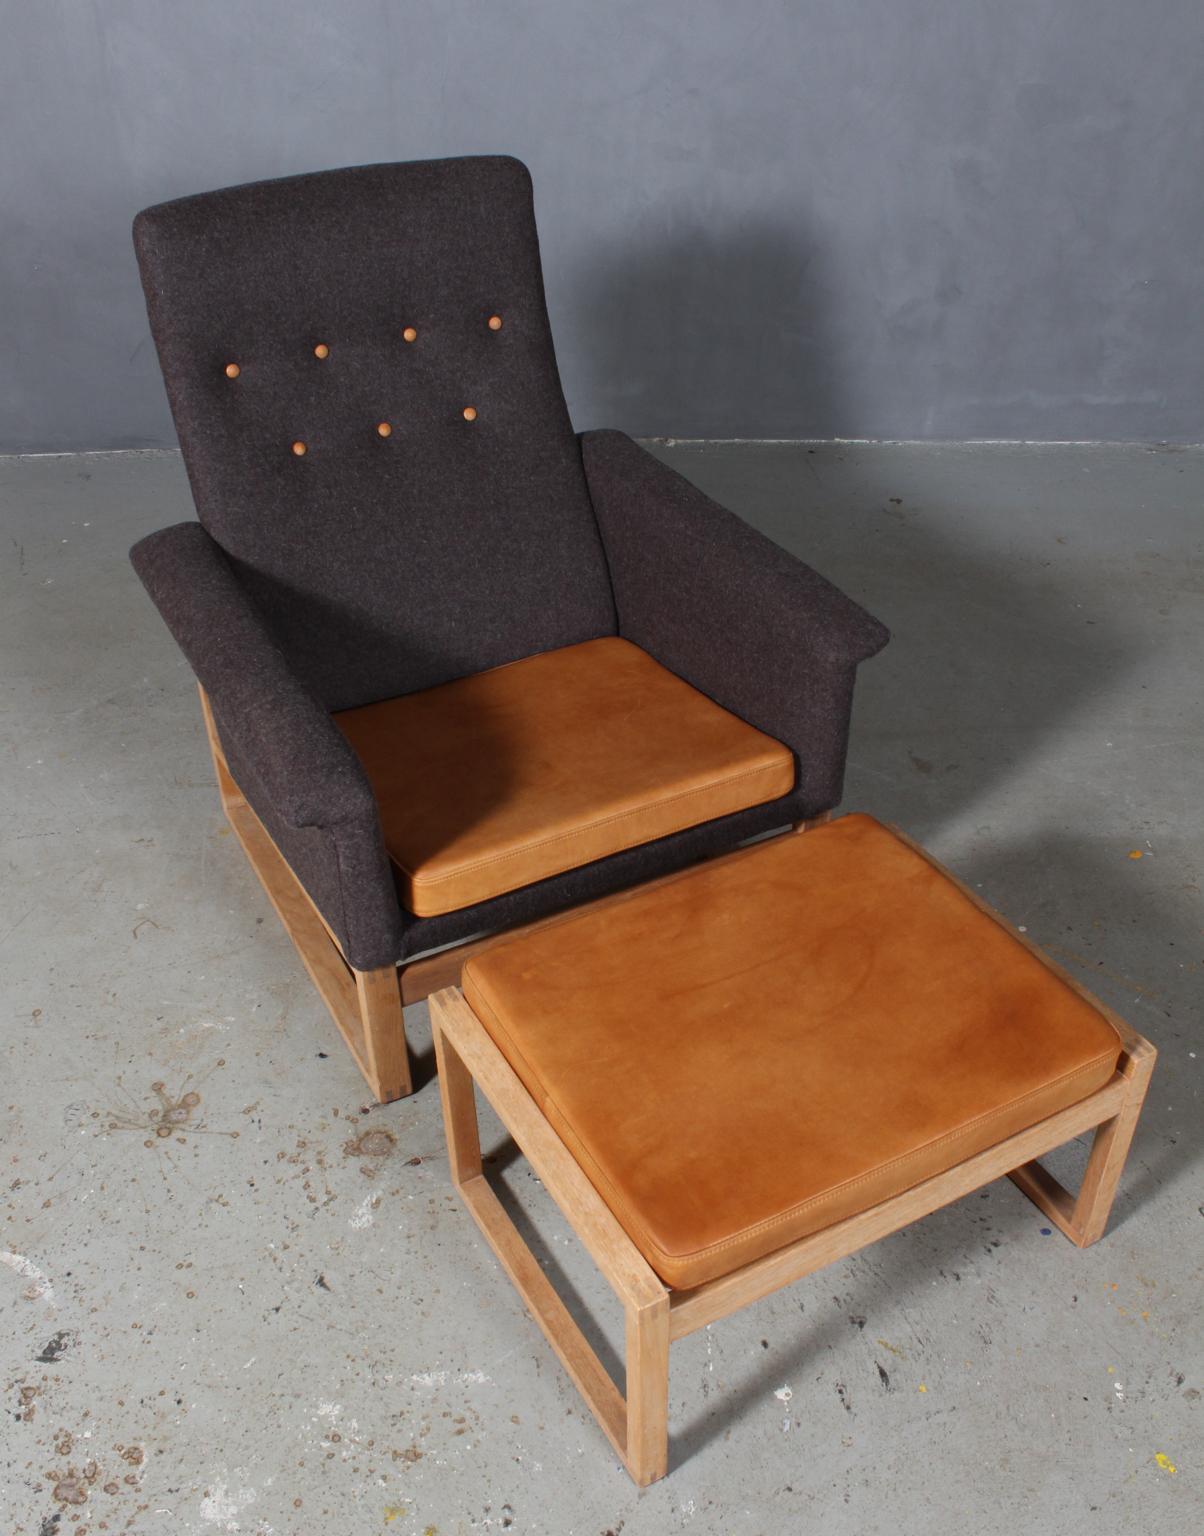 Børge Mogensen oak sled lounge chair with ottoman with frame of oak.

New upholstered with 100% New Zealand wool and vintage aniline leather.

Model 160/161, made by Fredericia Furniture.